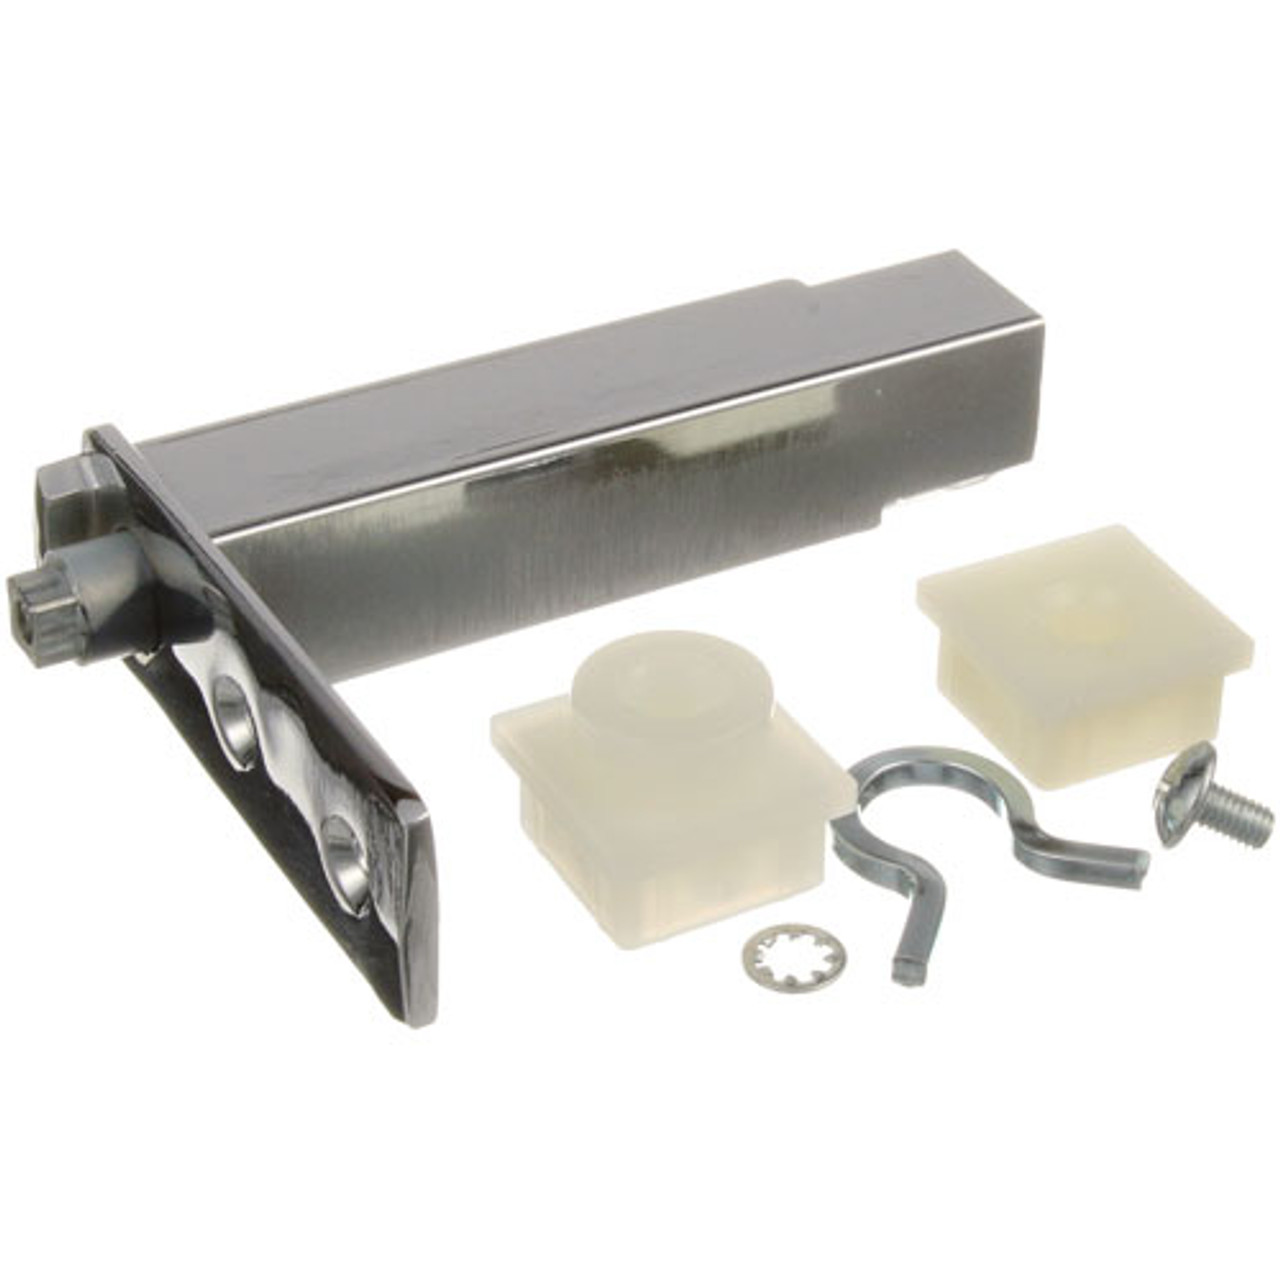 Concealed Hinge - Replacement Part For Glenco SP700-1